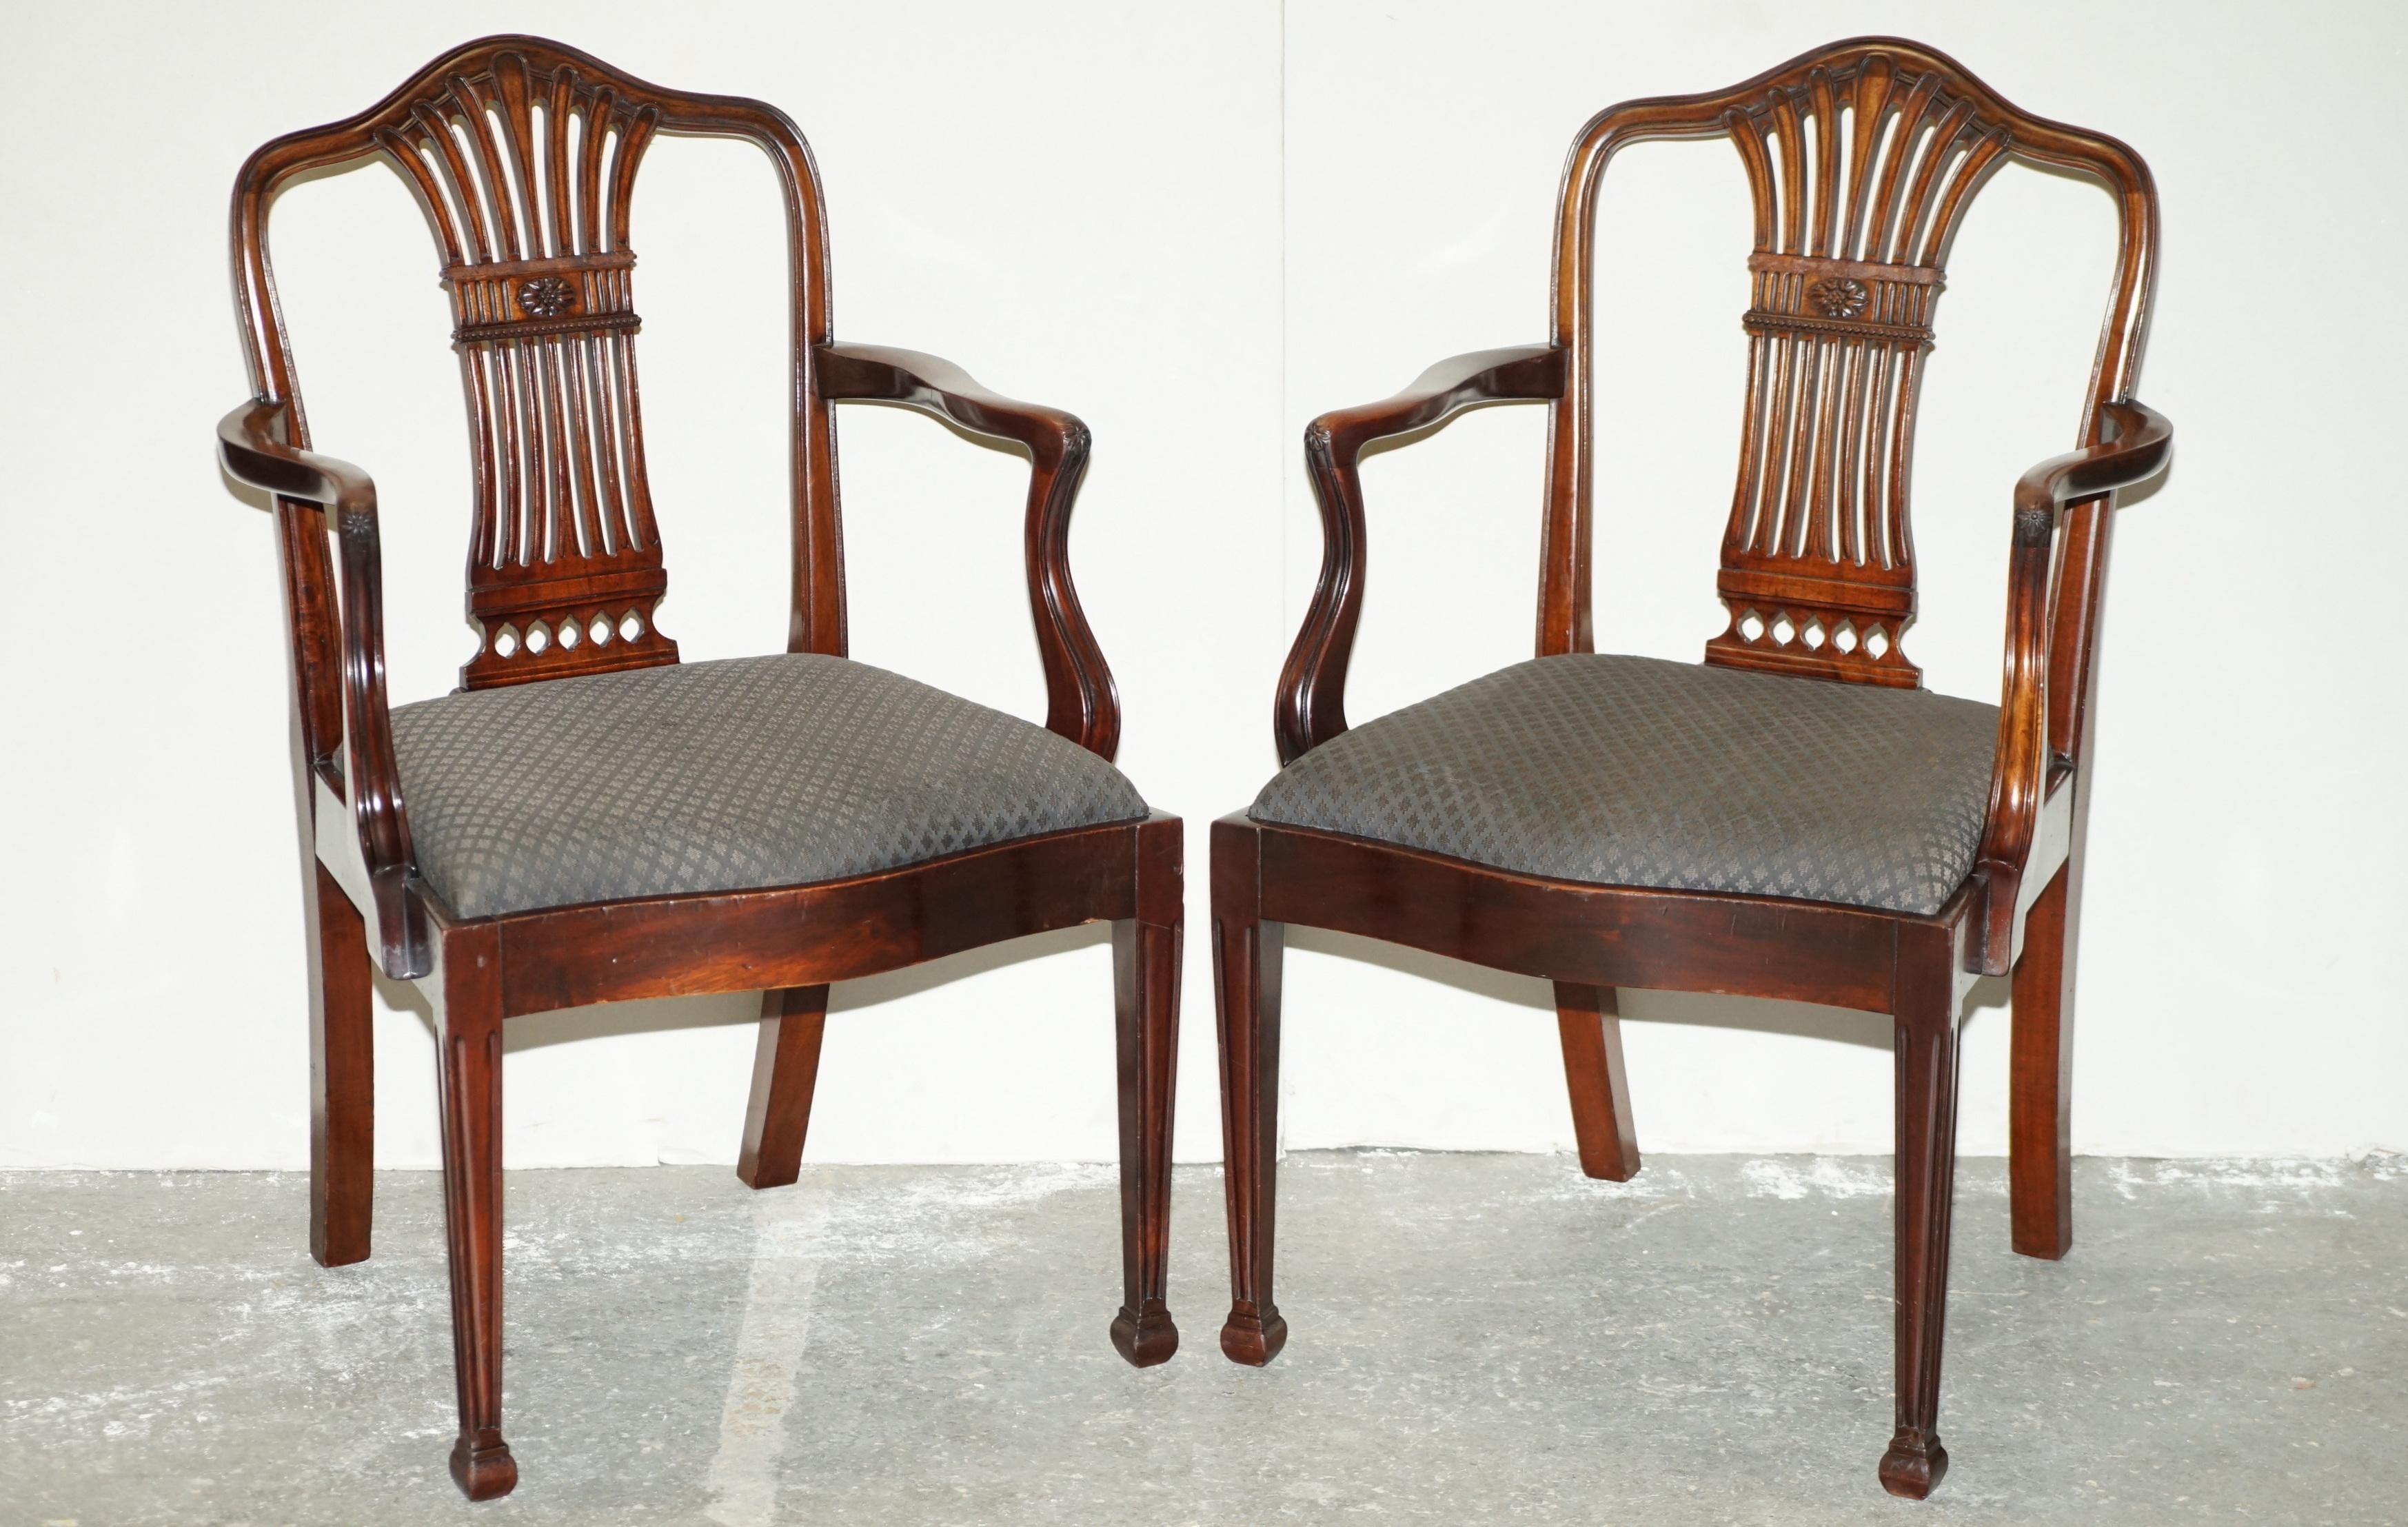 8 ANTIQUE GEORGE HEPPLEWHITE STYLE DINING CHAIRS FROM LADY DIANA'S SPENCER HOUSE (Englisch) im Angebot